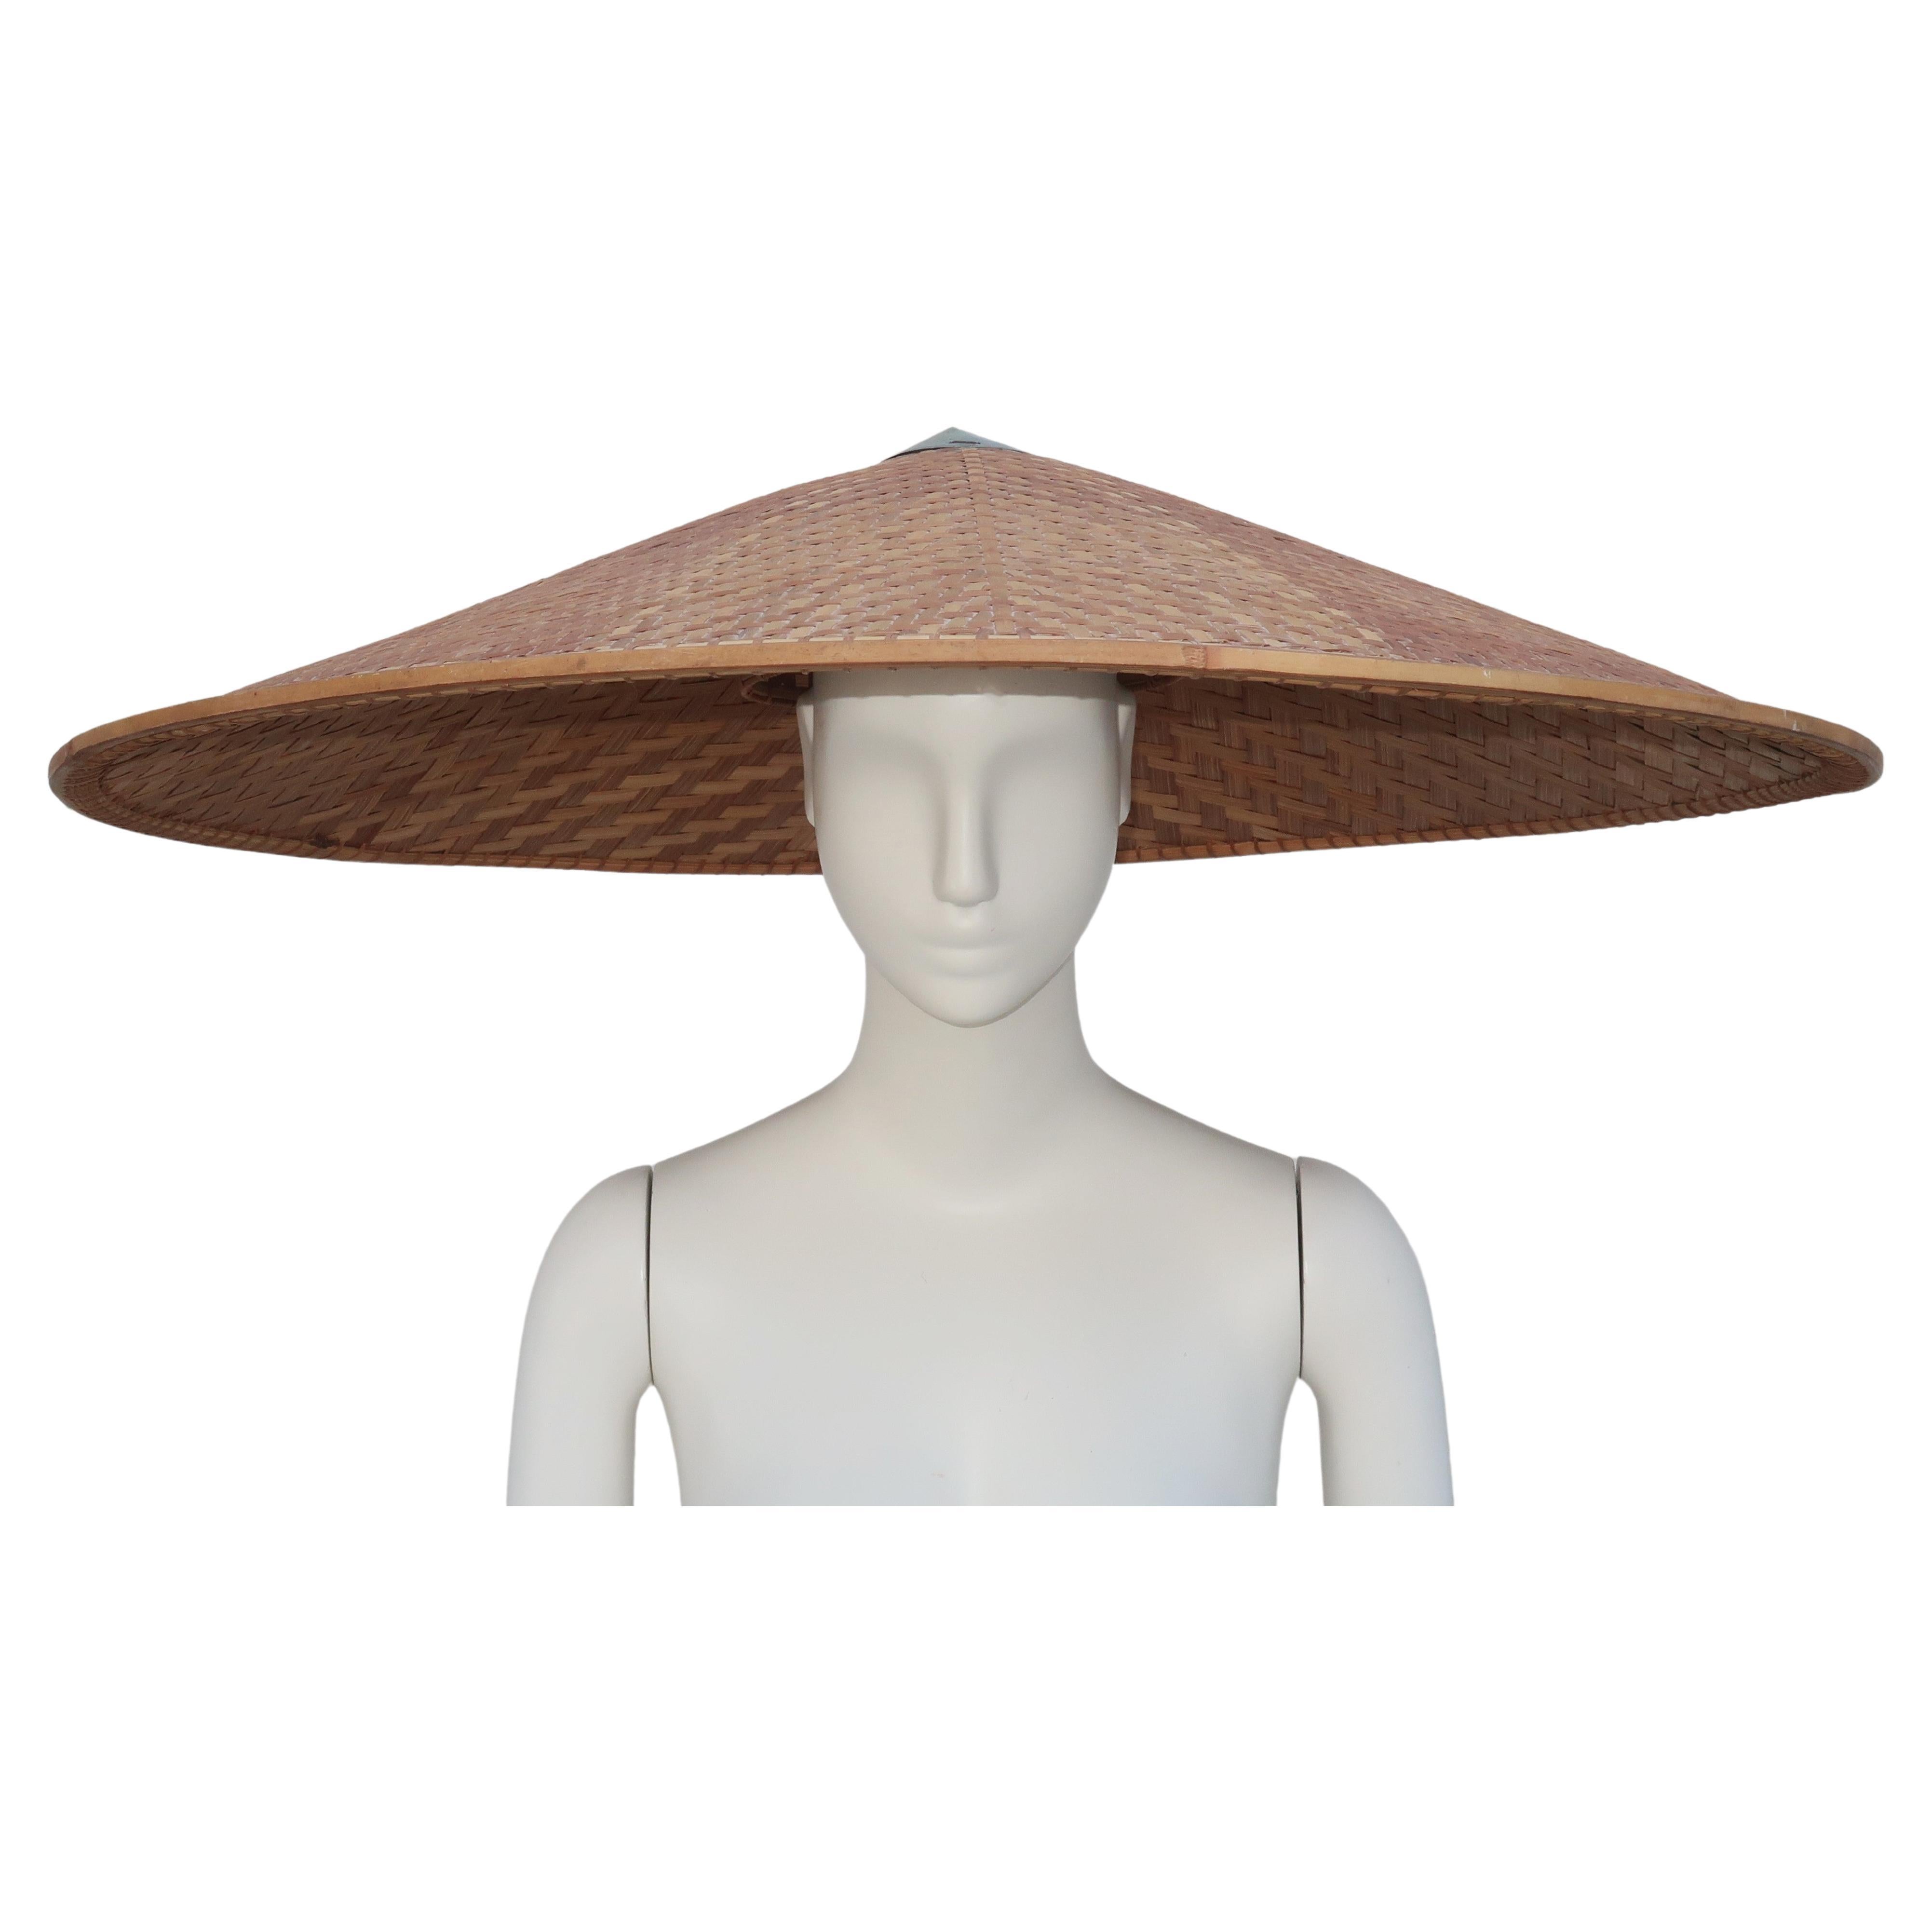 Large Novelty Wicker Straw Pagoda Beach Hat, 1950's For Sale